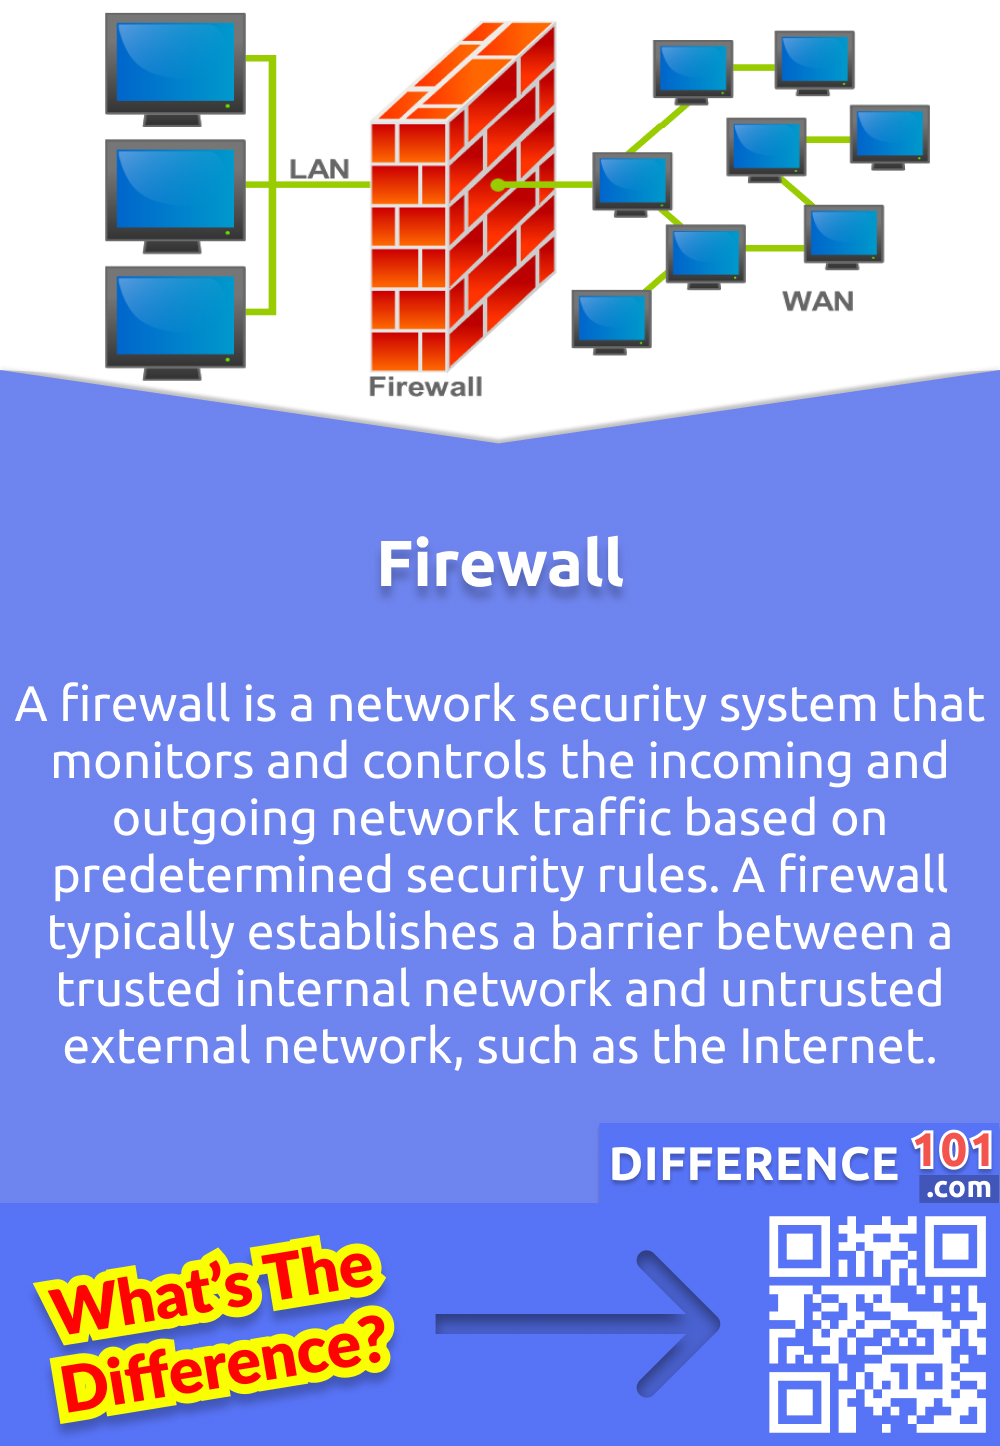 What Is Firewall? A firewall is a network security system that monitors and controls the incoming and outgoing network traffic based on predetermined security rules. A firewall typically establishes a barrier between a trusted internal network and untrusted external network, such as the Internet.
